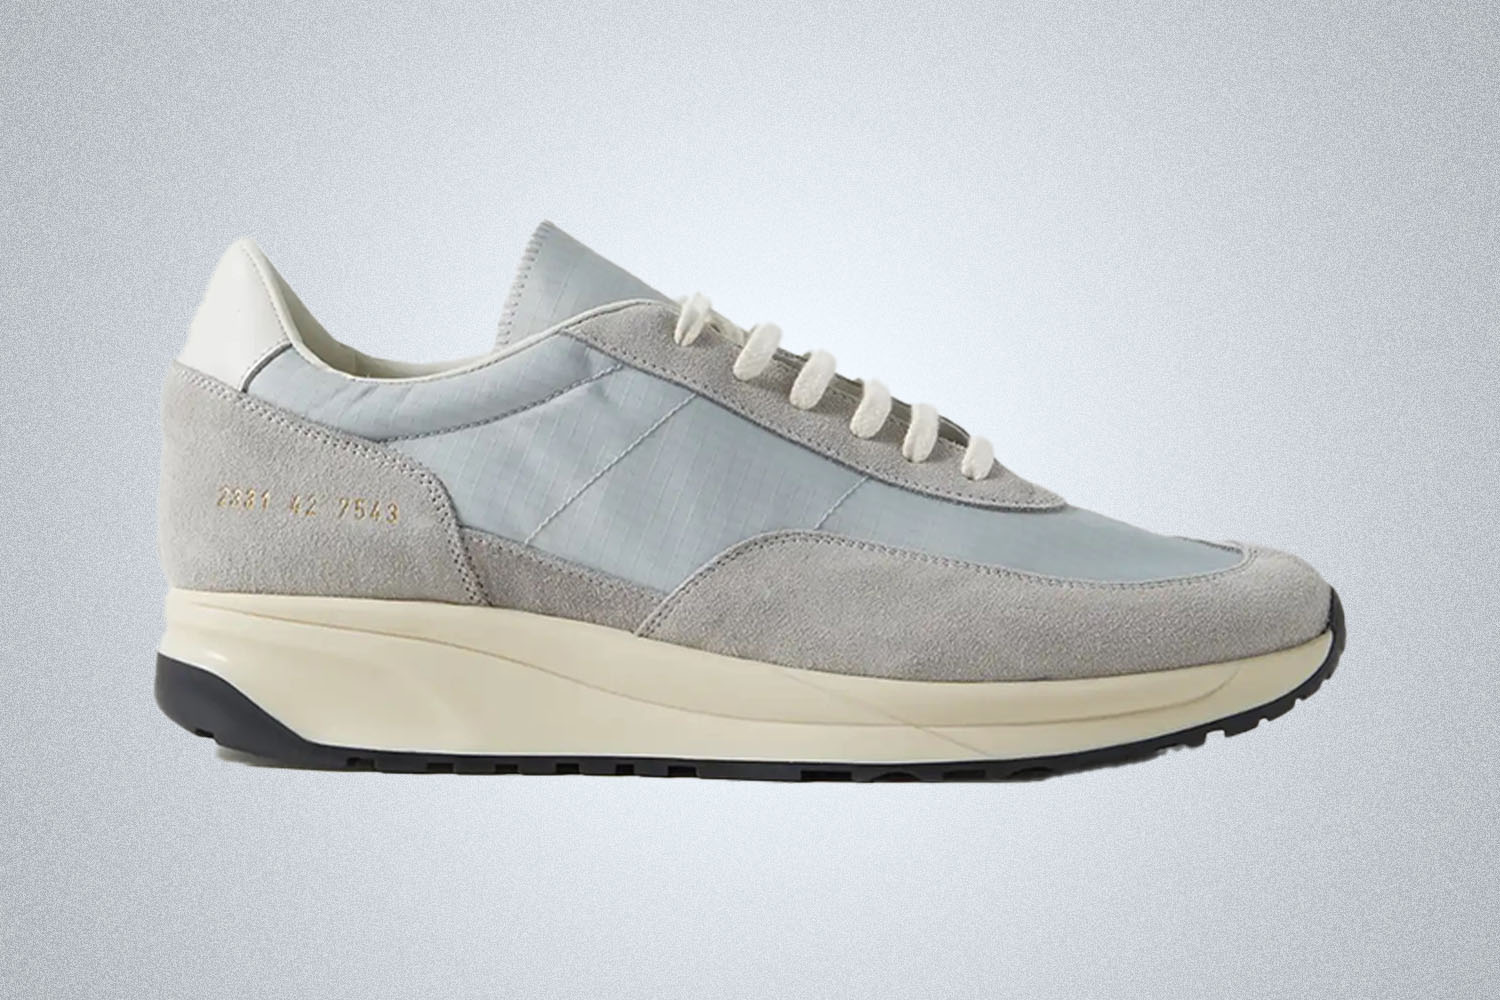 A grey retro running shoe by Common Projects from Mr. Porter on a grey background